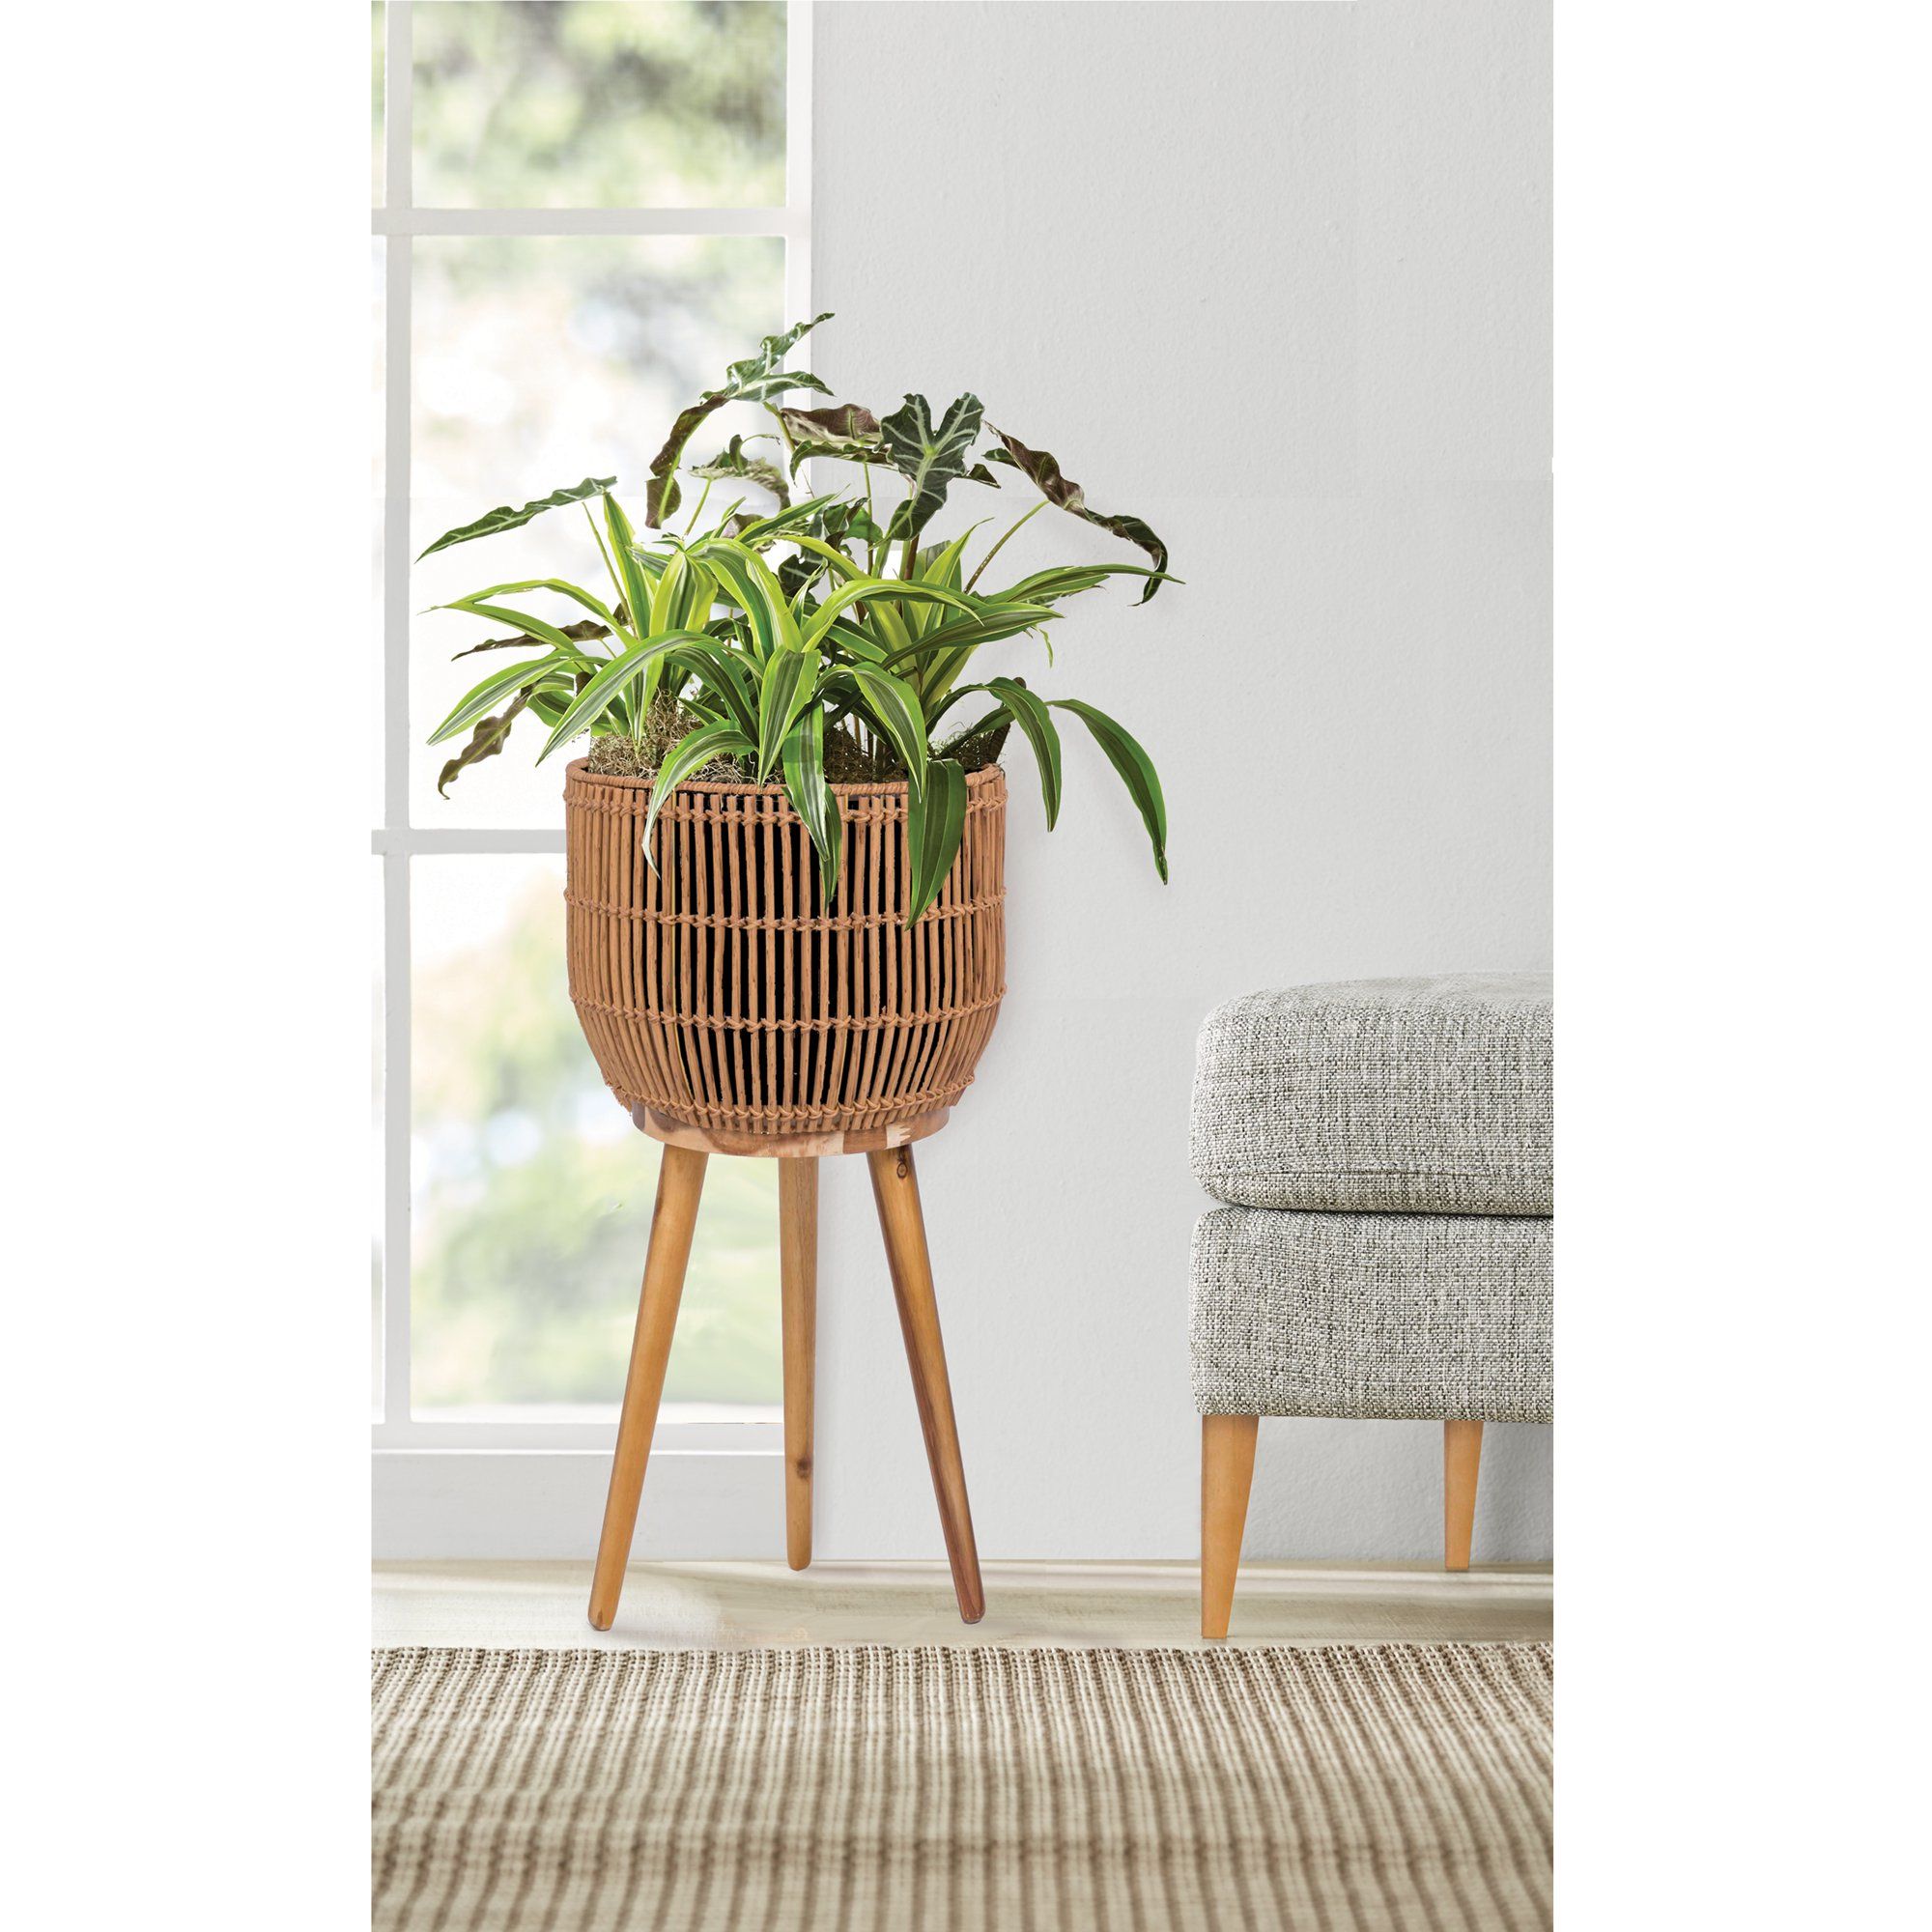 Better Homes & Gardens 13 IN Natural Resin Rattan Planter with Wood Legs | Walmart (US)